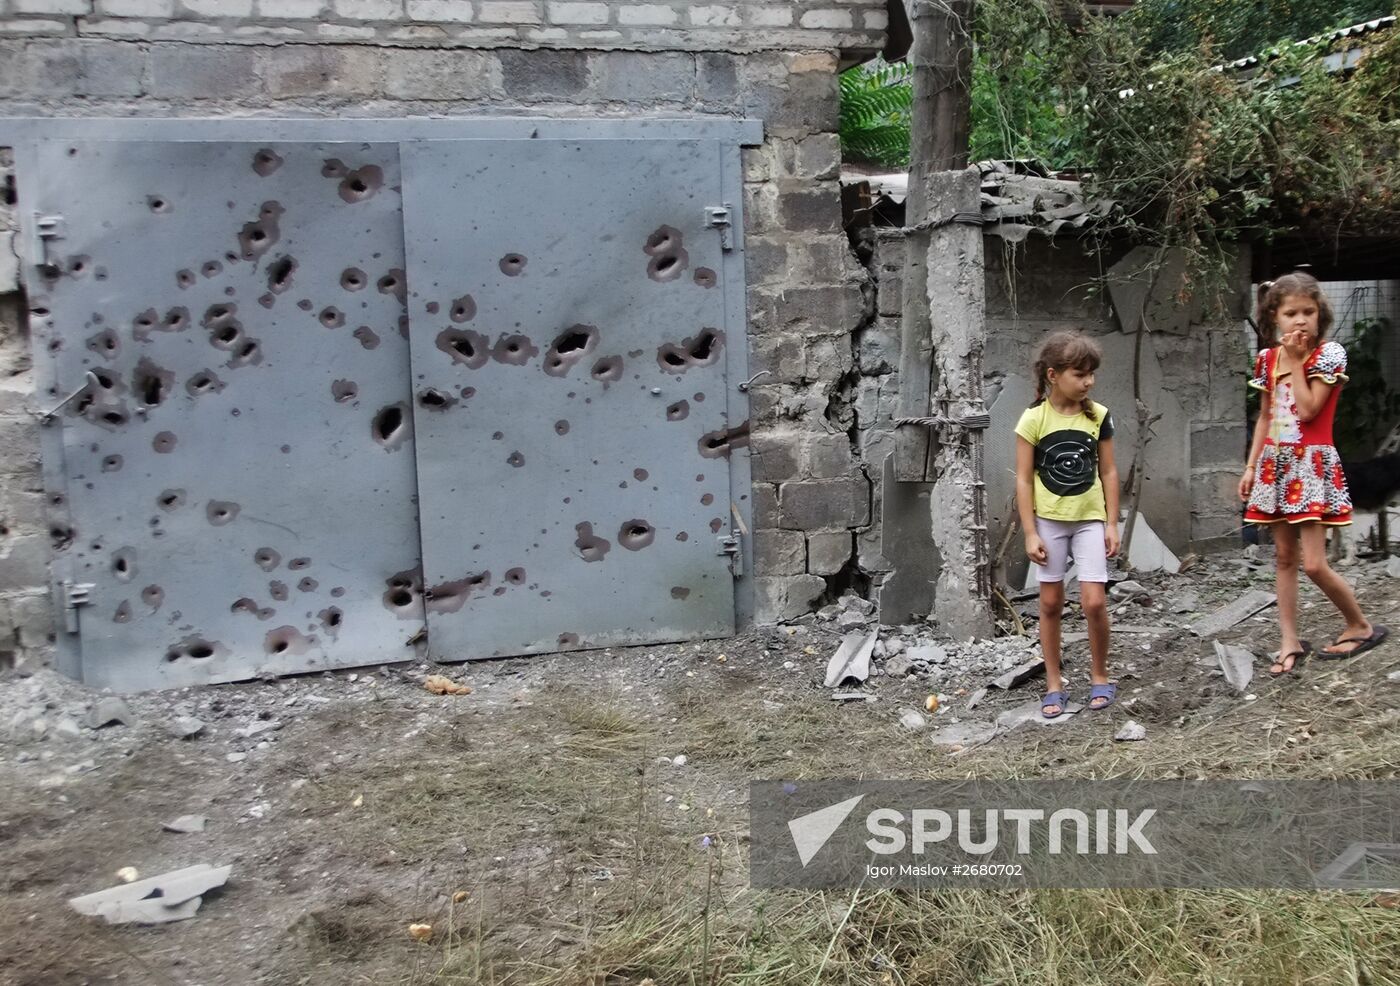 Shelling aftermath in Donetsk